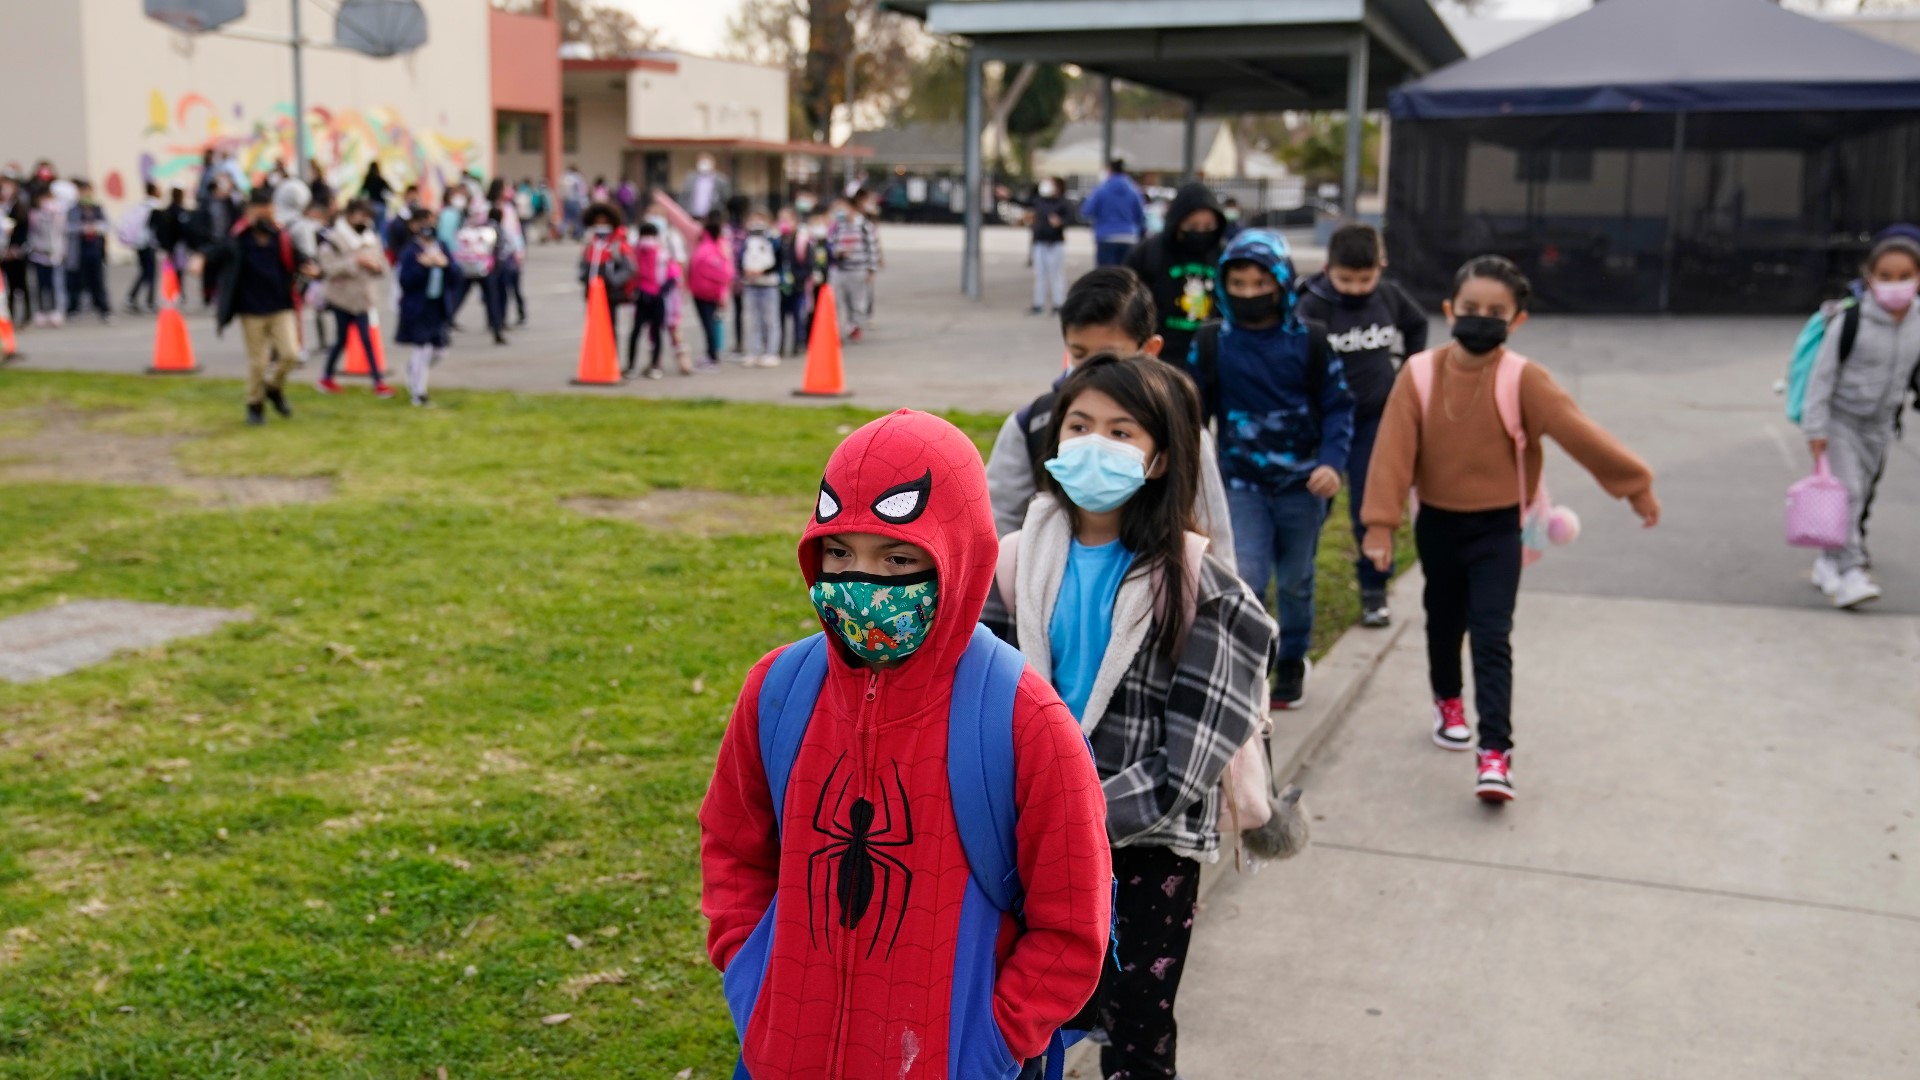 The Sacramento City Unified School District said the mask mandate could return as COVID cases increase in the area.